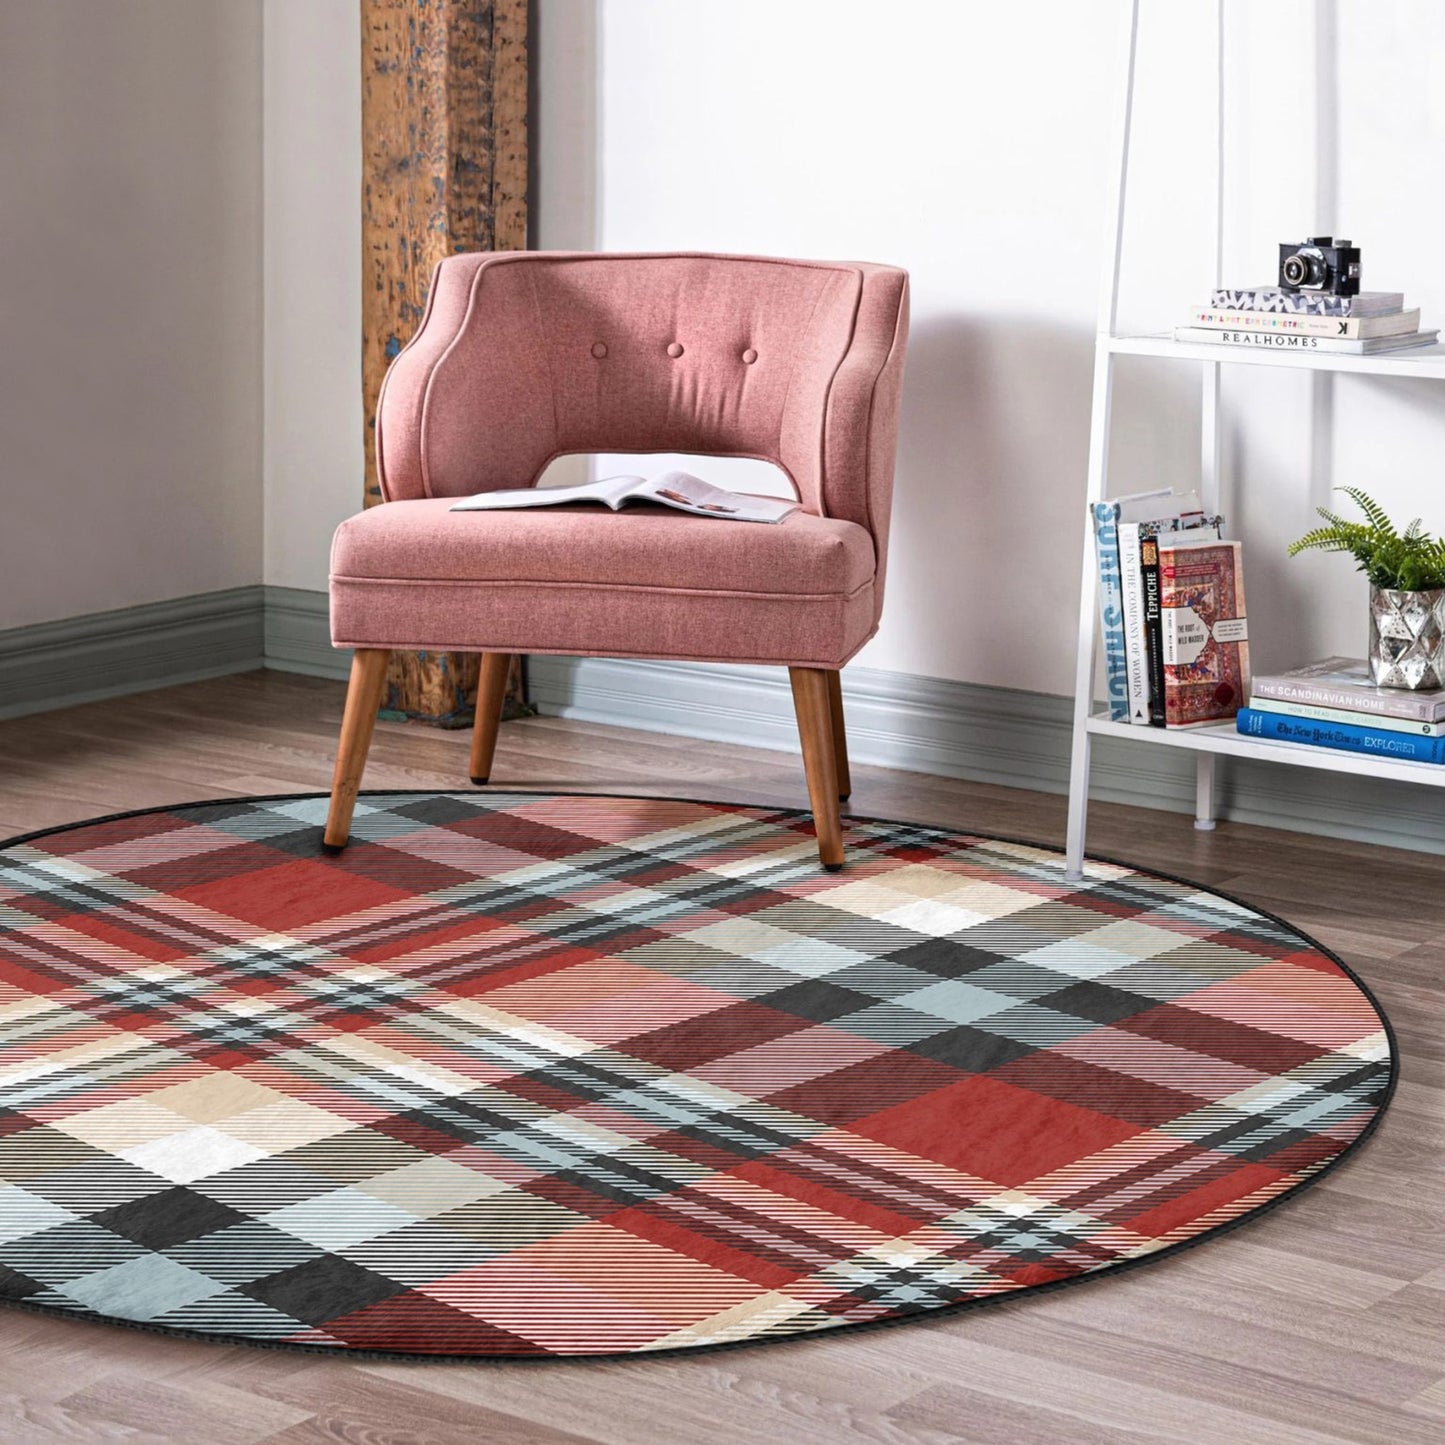 Round Patterned Floor Rug - Cozy Accent